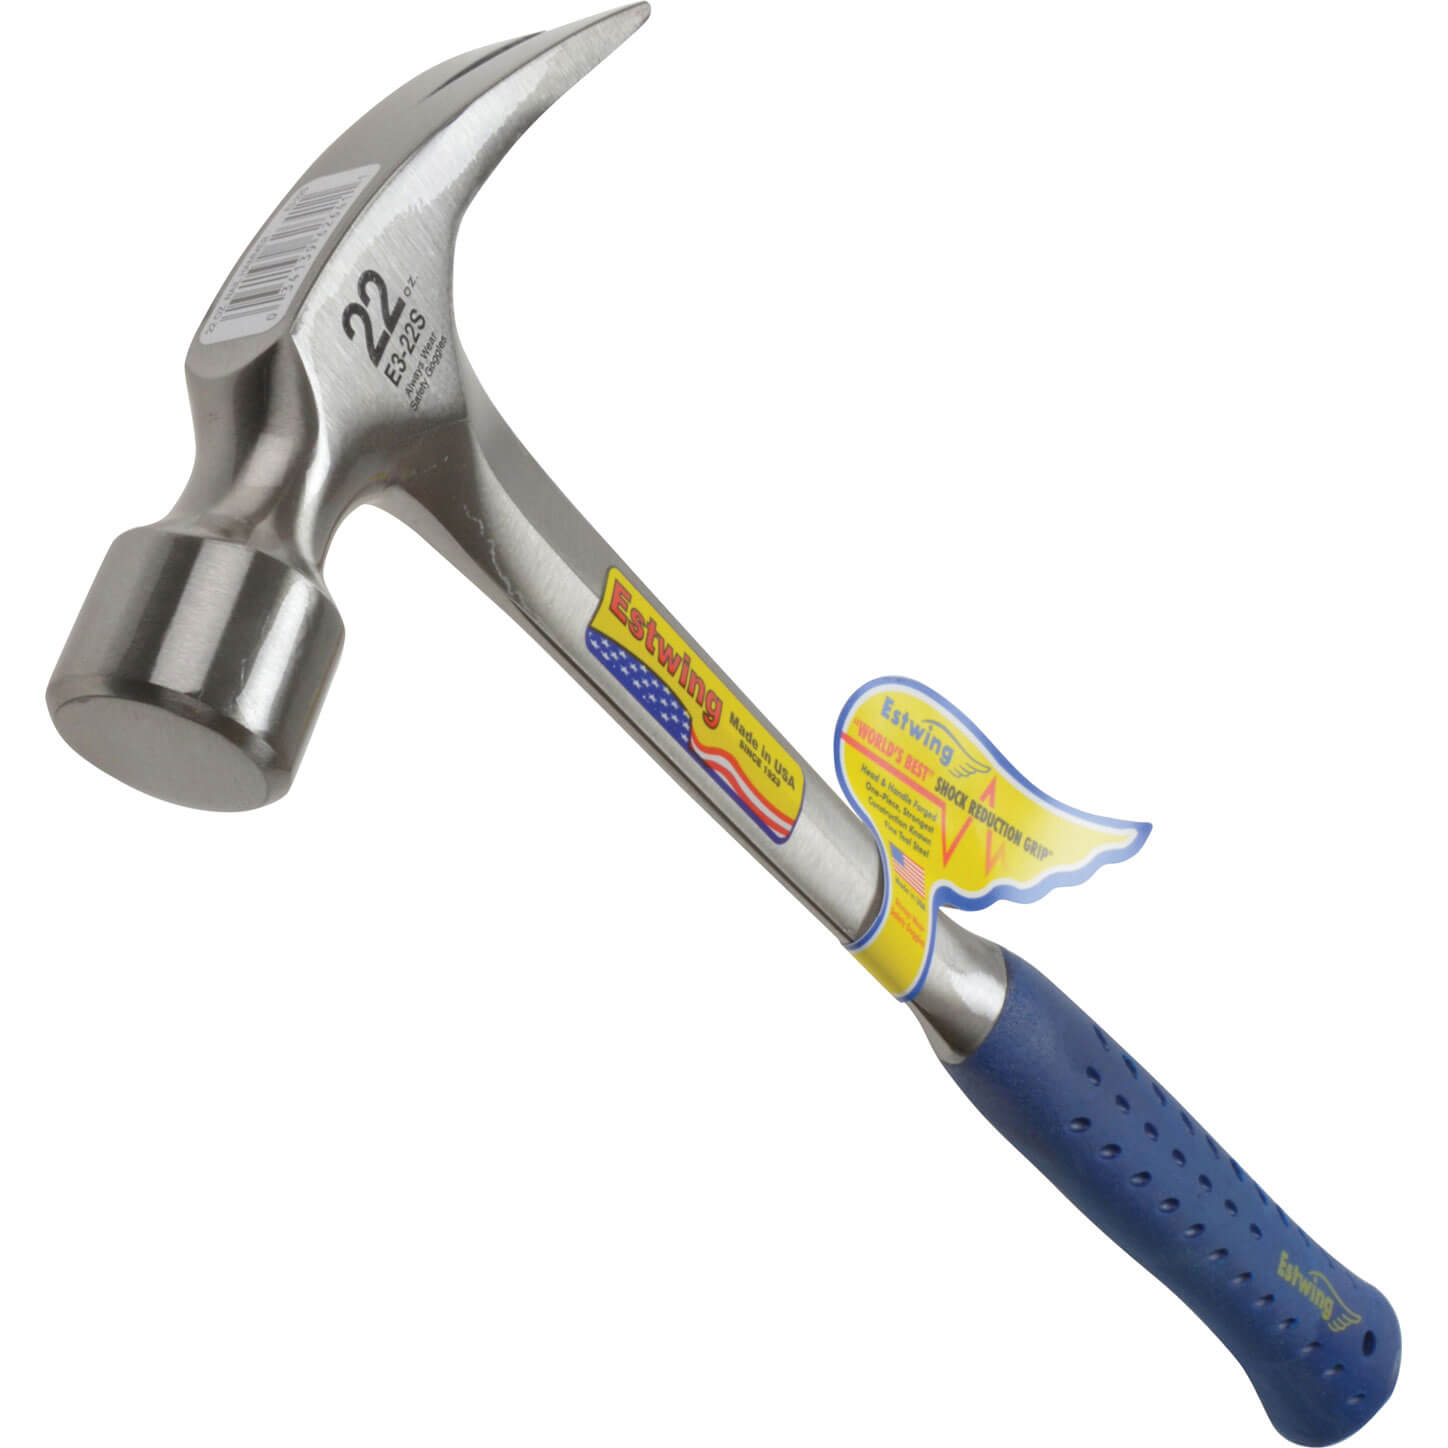 Image of Estwing Straight Claw Framing Hammer 625g